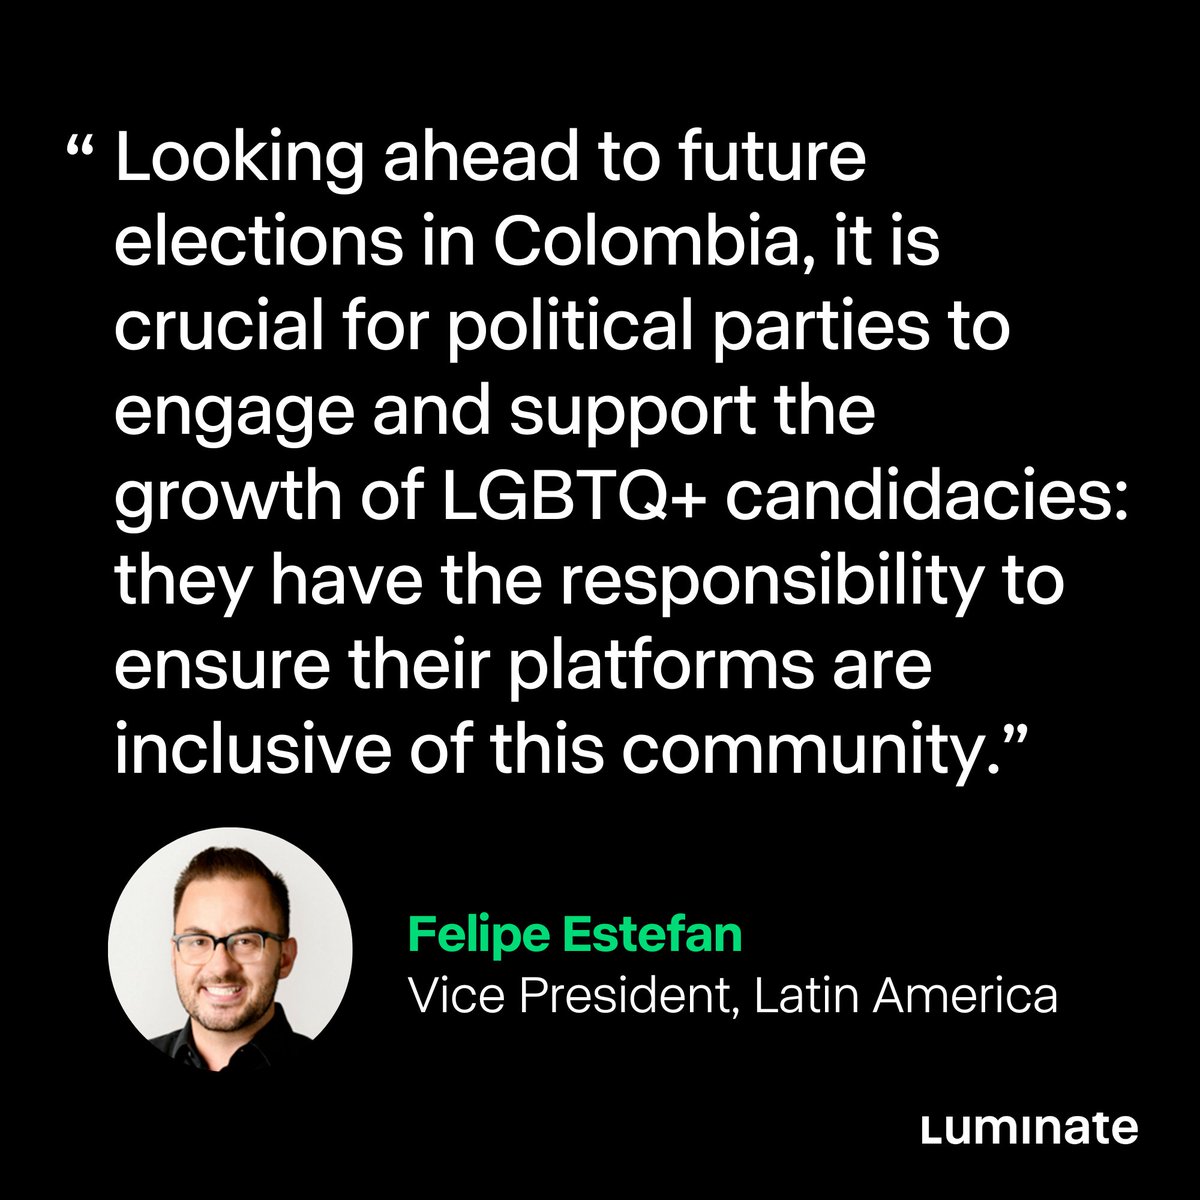 As we approach the 2023 local elections in Colombia this Sunday, our @FelipeEstefan reflects on the importance of increasing the political representation of the LGBTQ+ community: luminategroup.co/46NaTvo